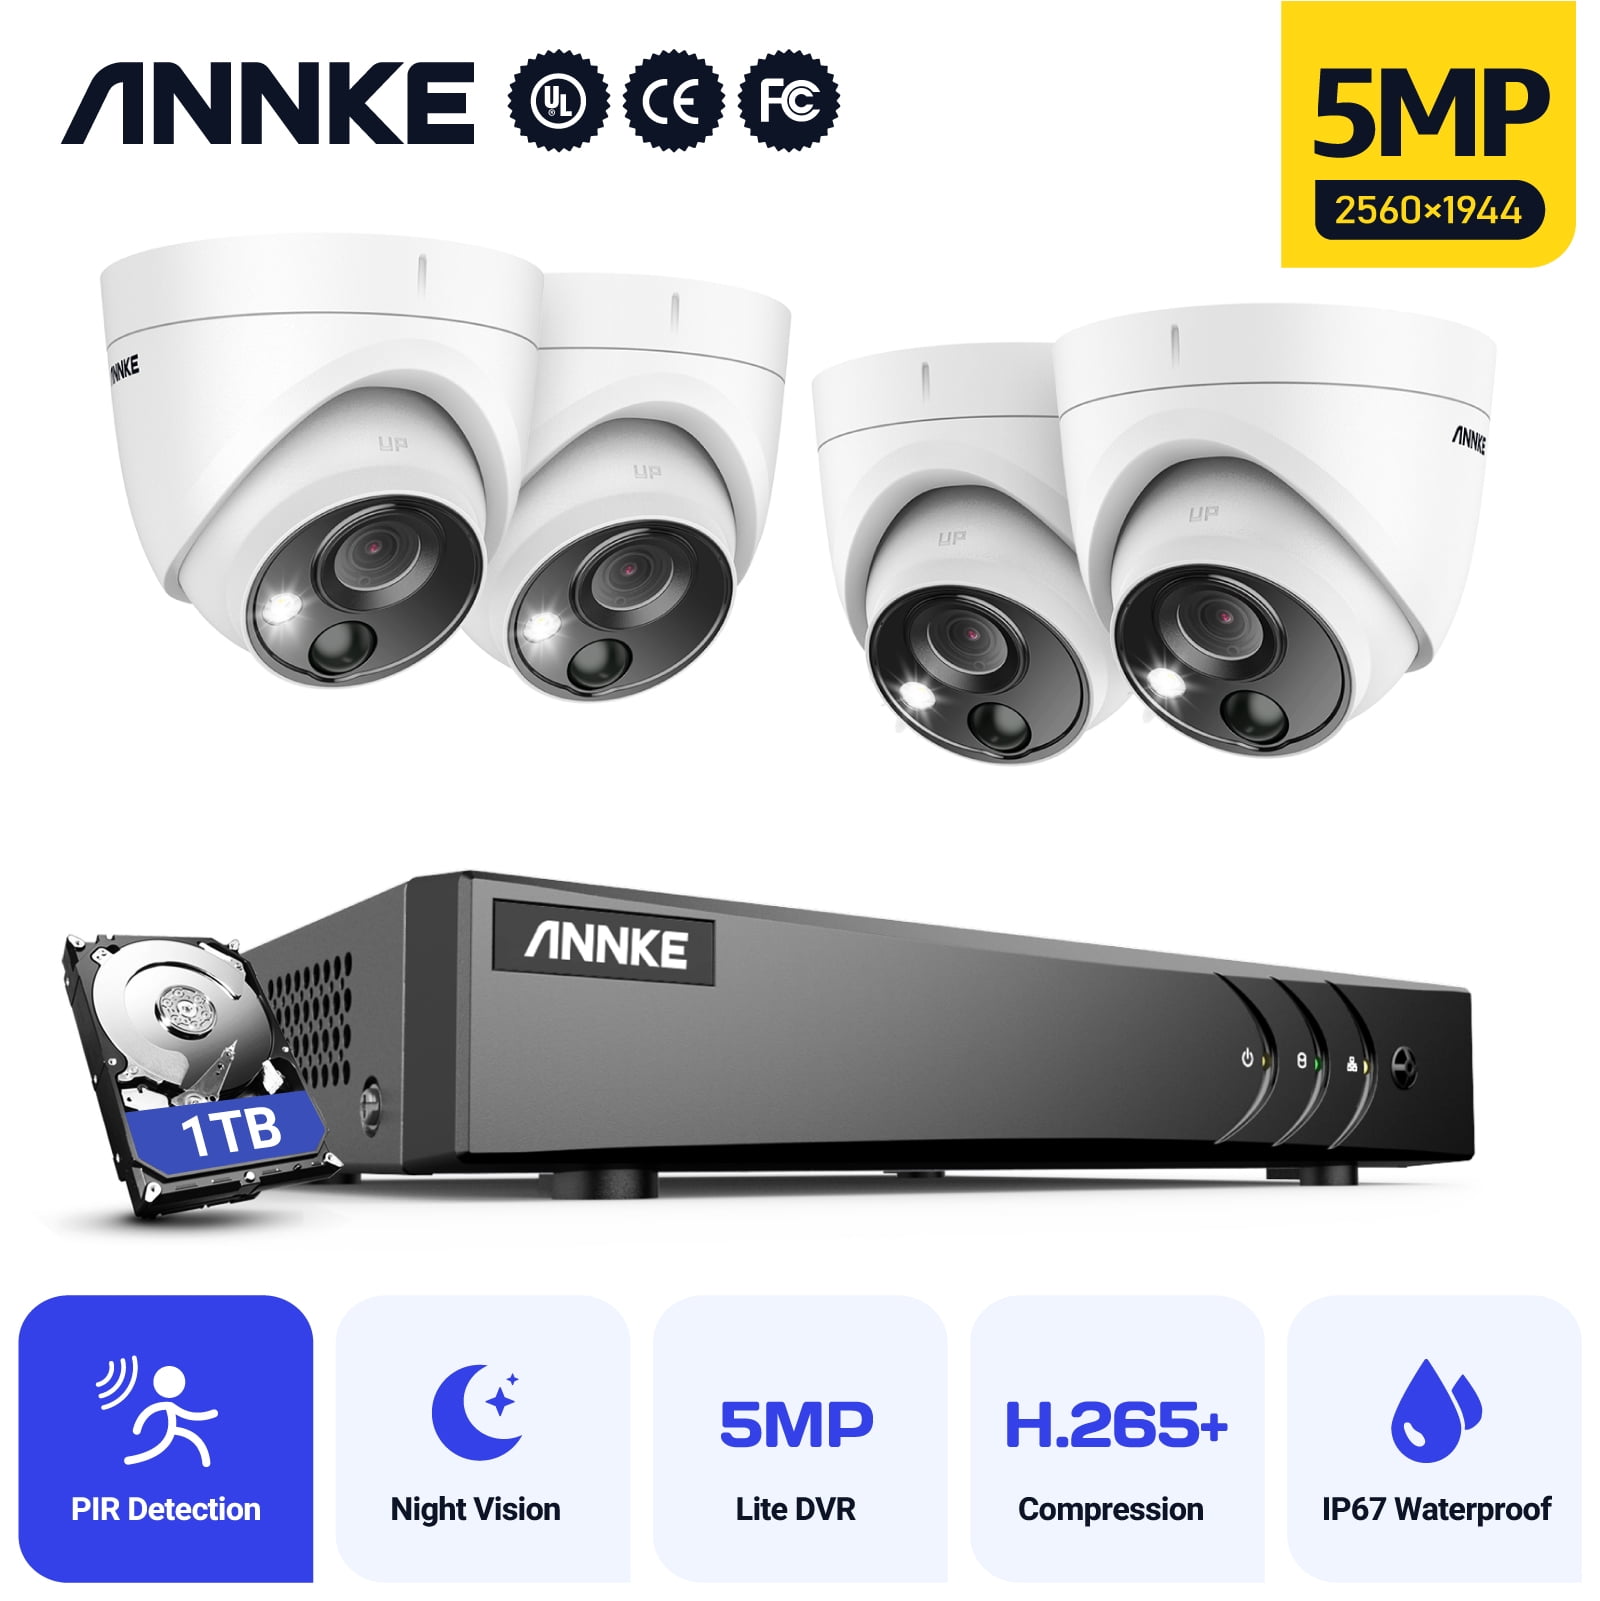 ANNKE ANNKE CCTV 1080p Camera System 8+2CH 5MP Lite DVR Outdoor Home Security Kit IP66 